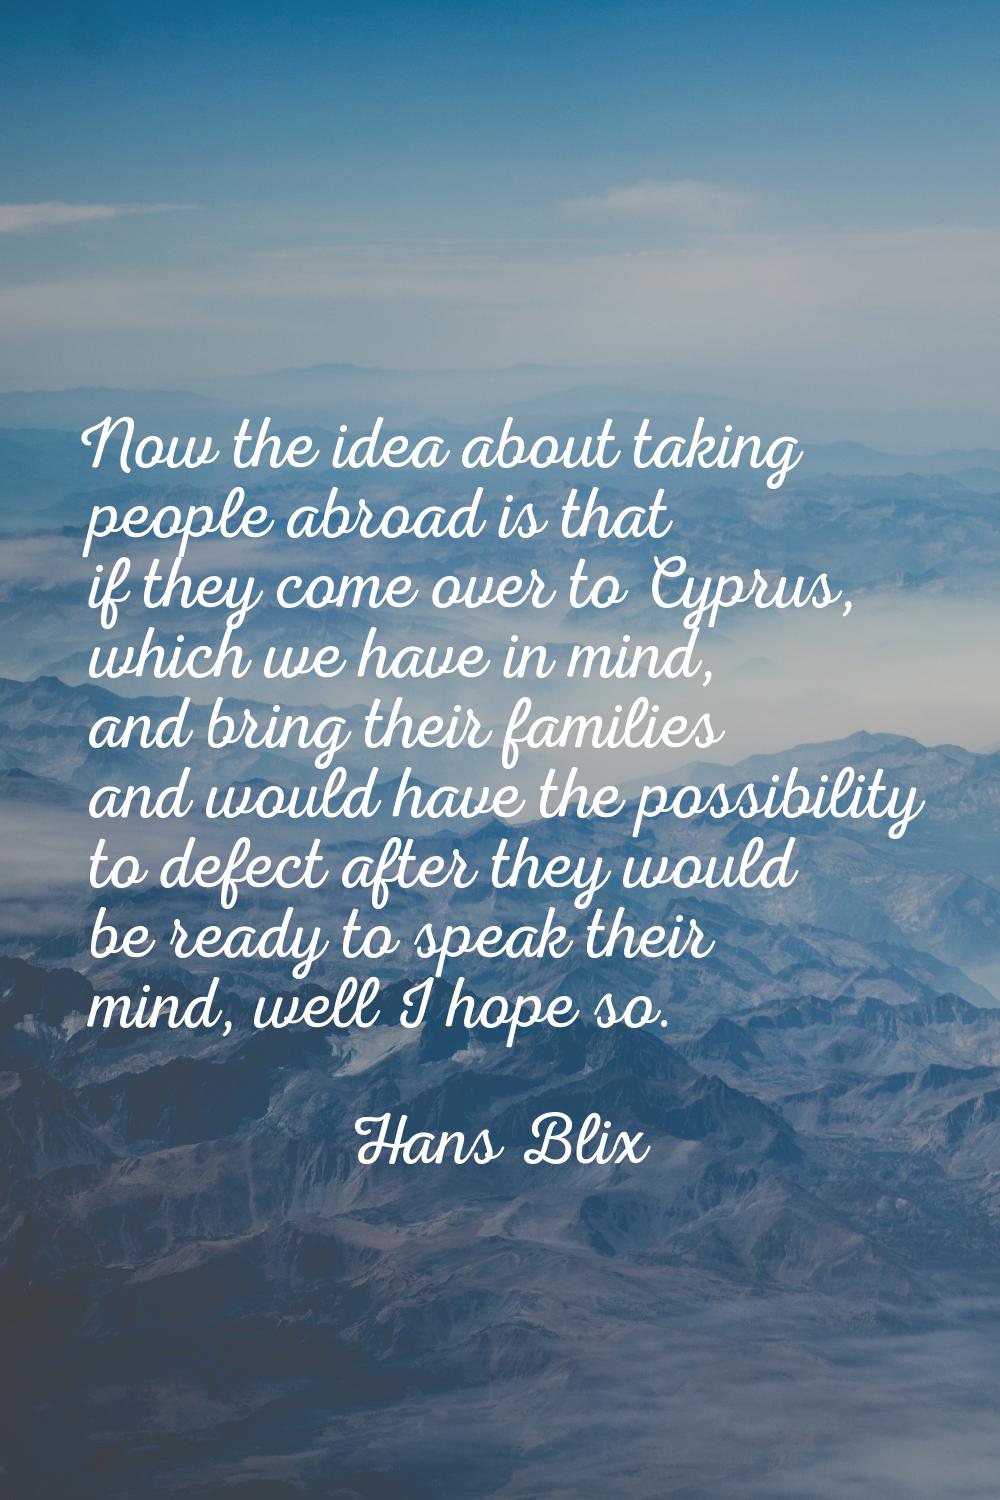 Now the idea about taking people abroad is that if they come over to Cyprus, which we have in mind,